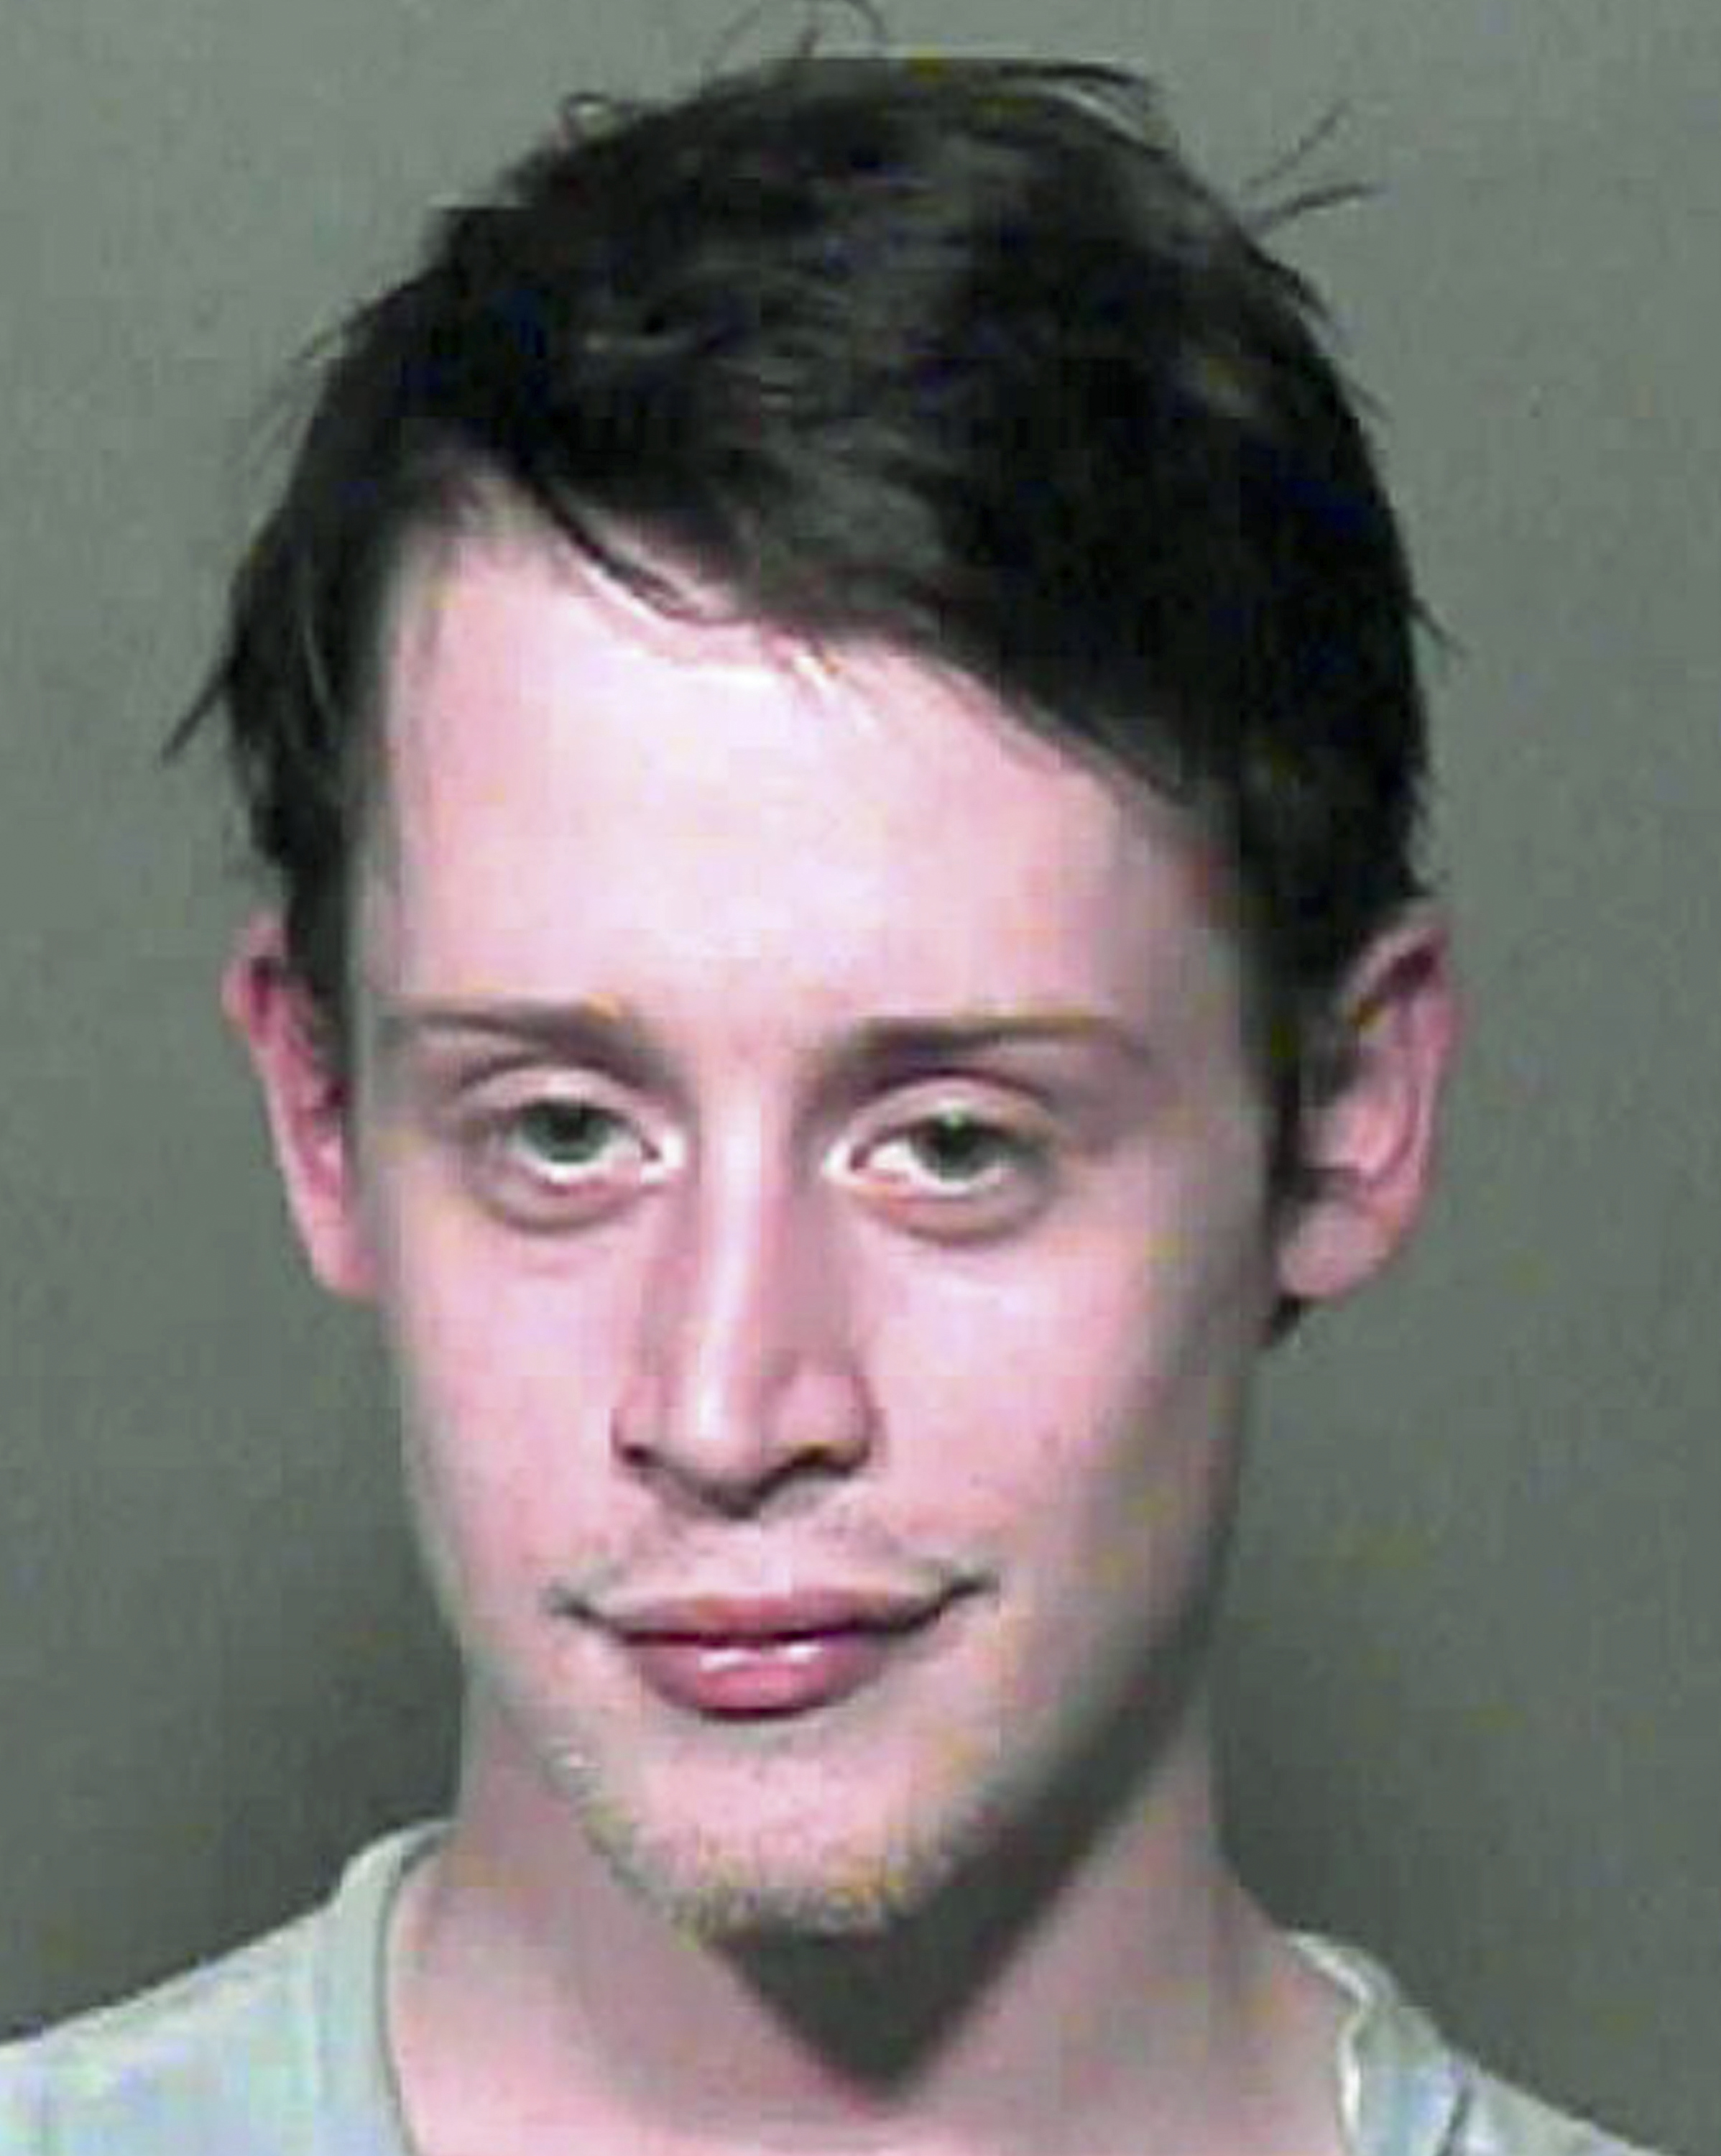 Macaulay Culkin in a mug shot following his arrest on drug charges in Oklahoma City on September 17, 2004 | Source: Getty Images